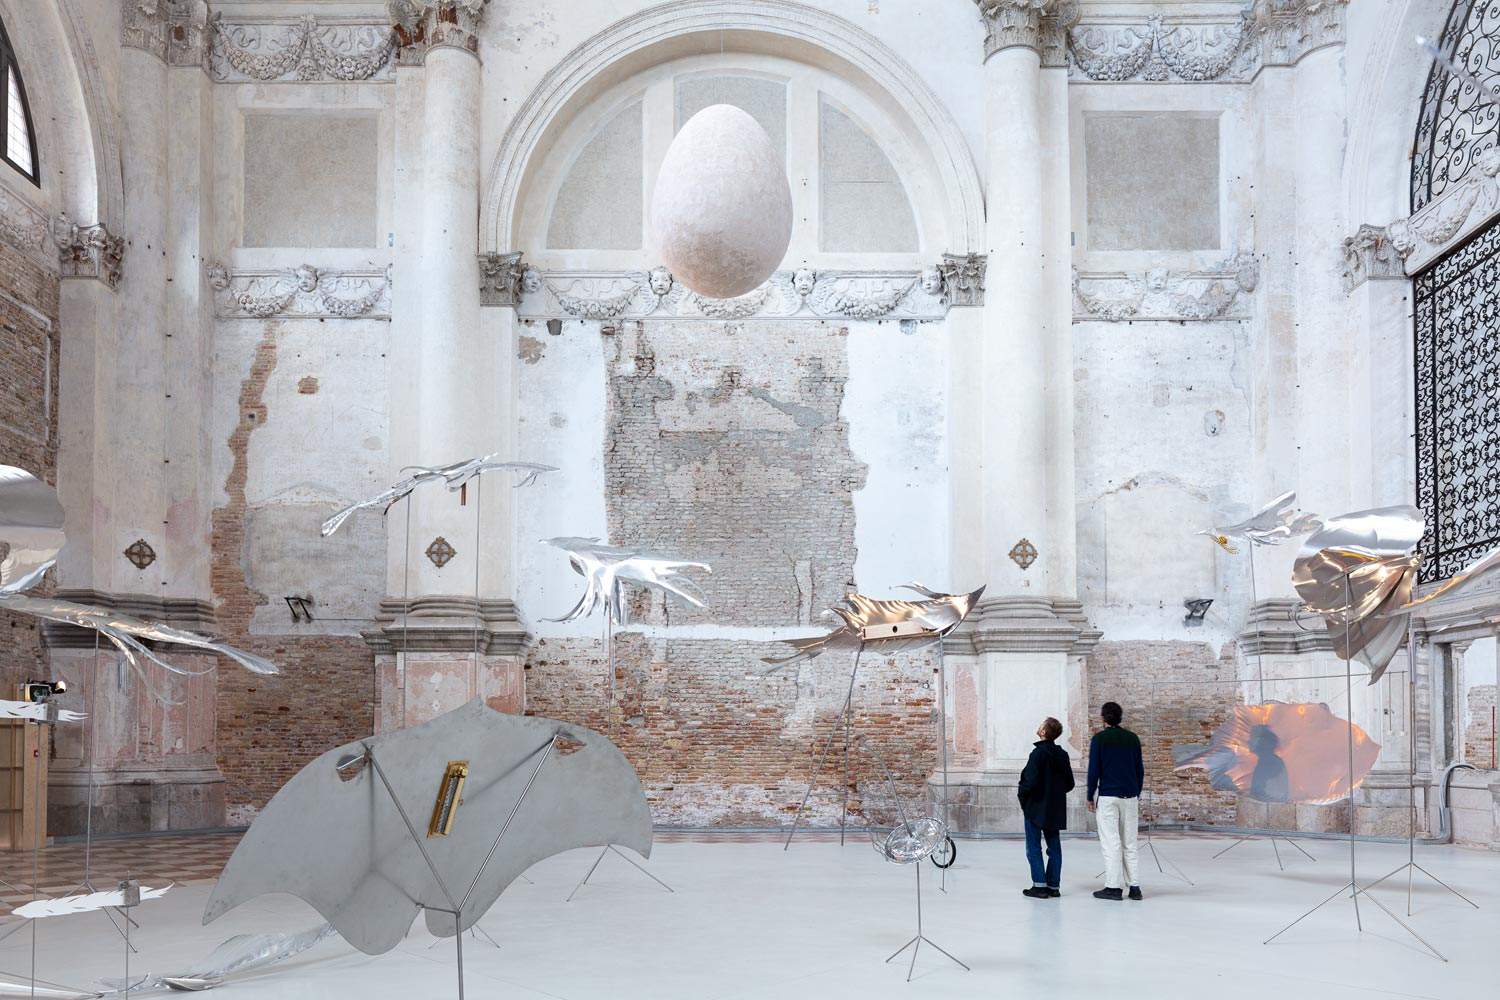 Venice, 3 artists fill an old church with dreamlike installations on climate change